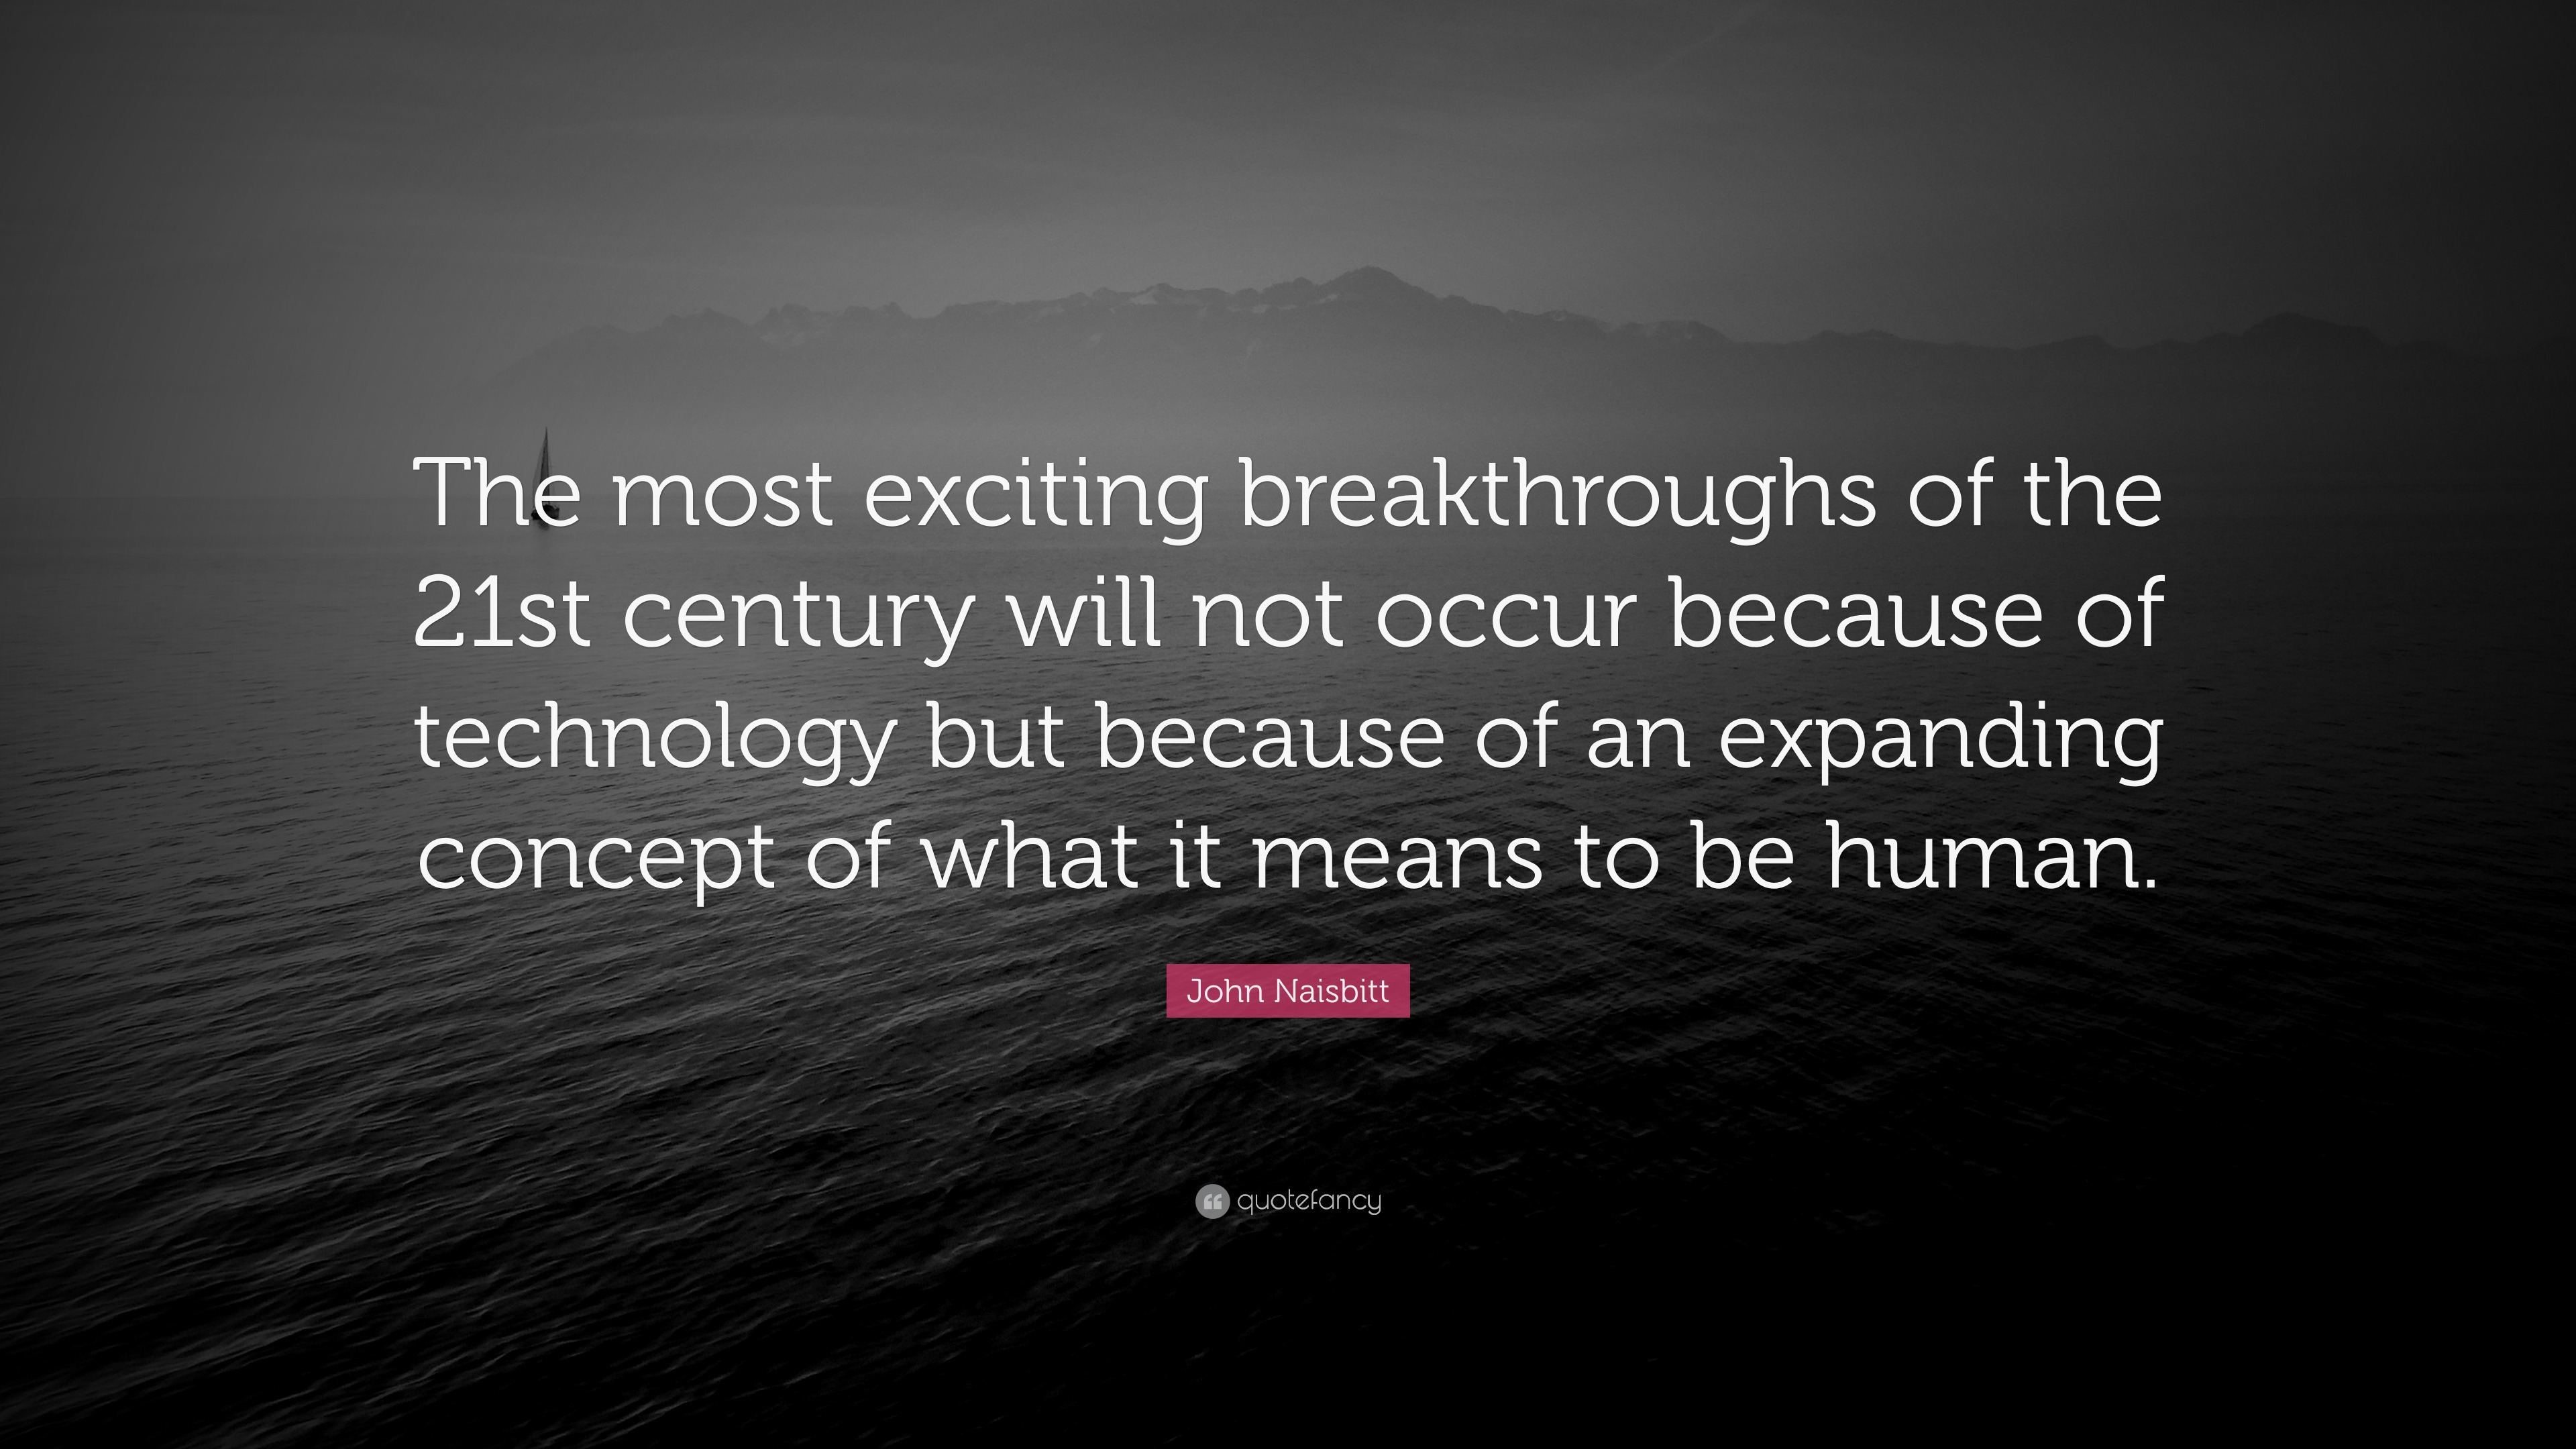 The most exciting breakthroughs of the 21st century will not occur because ...